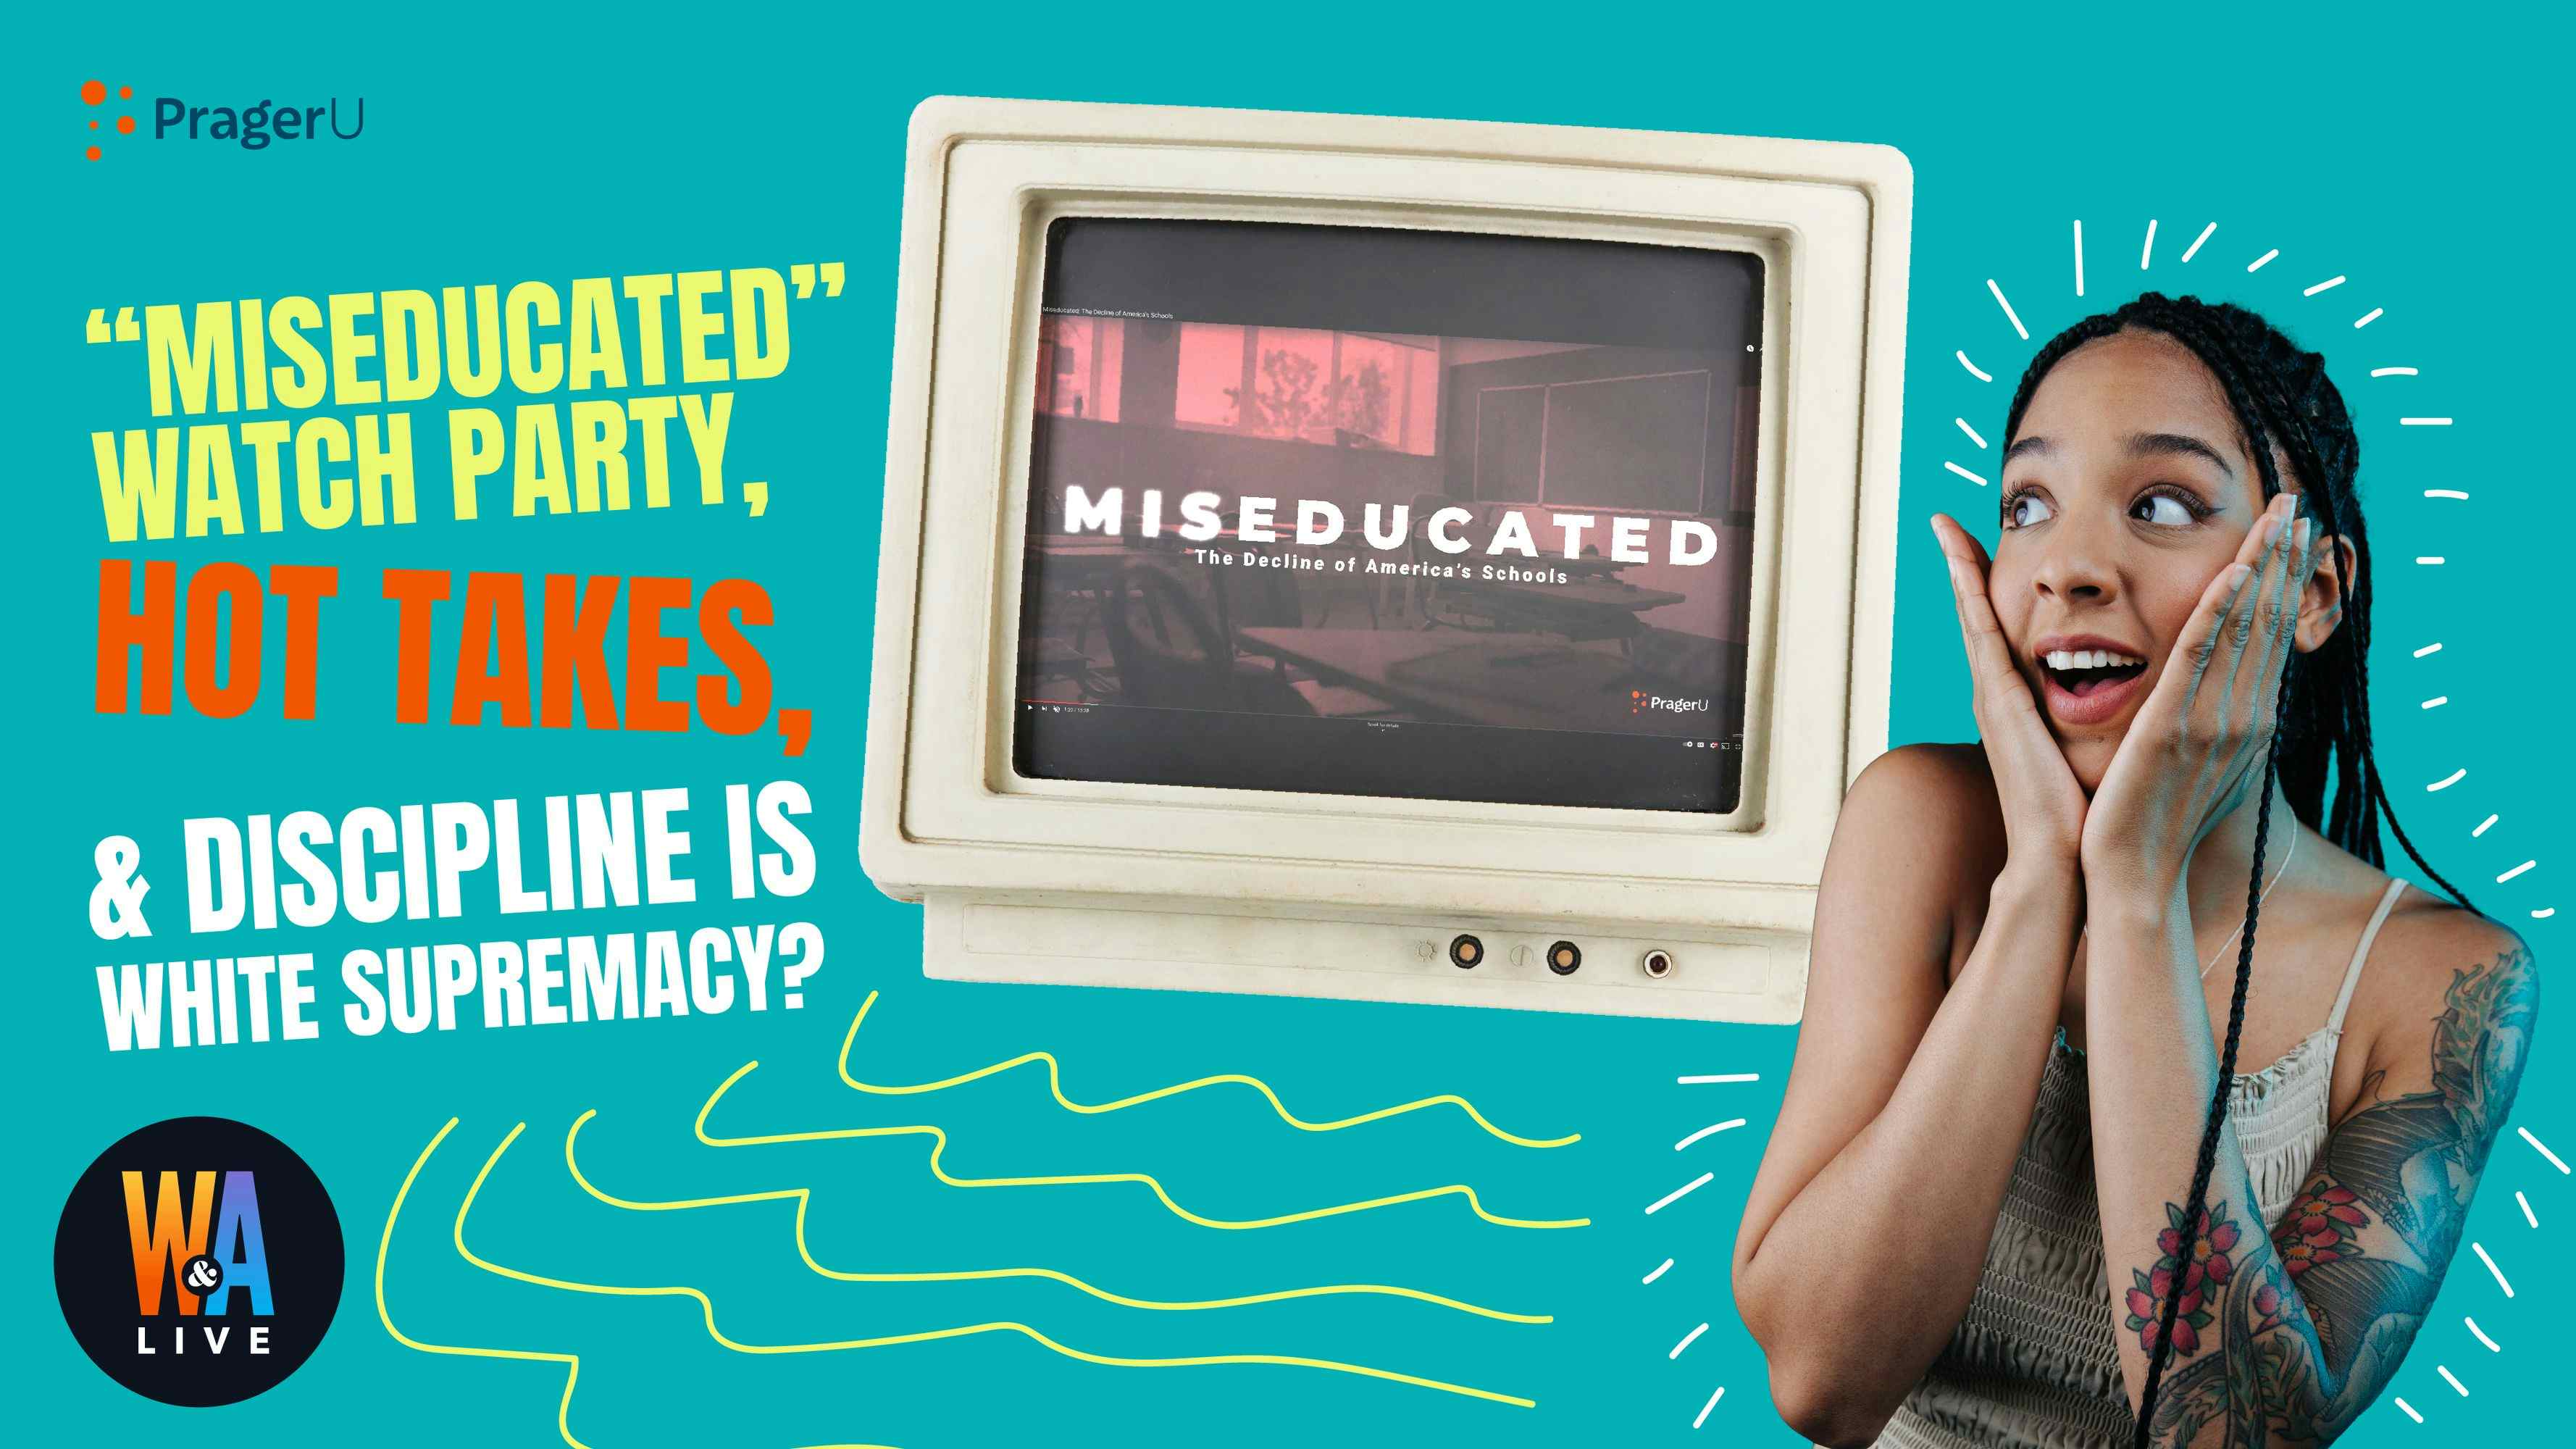 “Miseducated” Watch Party, Hot Takes, & Discipline Is White Supremacy?: 9/15/2021